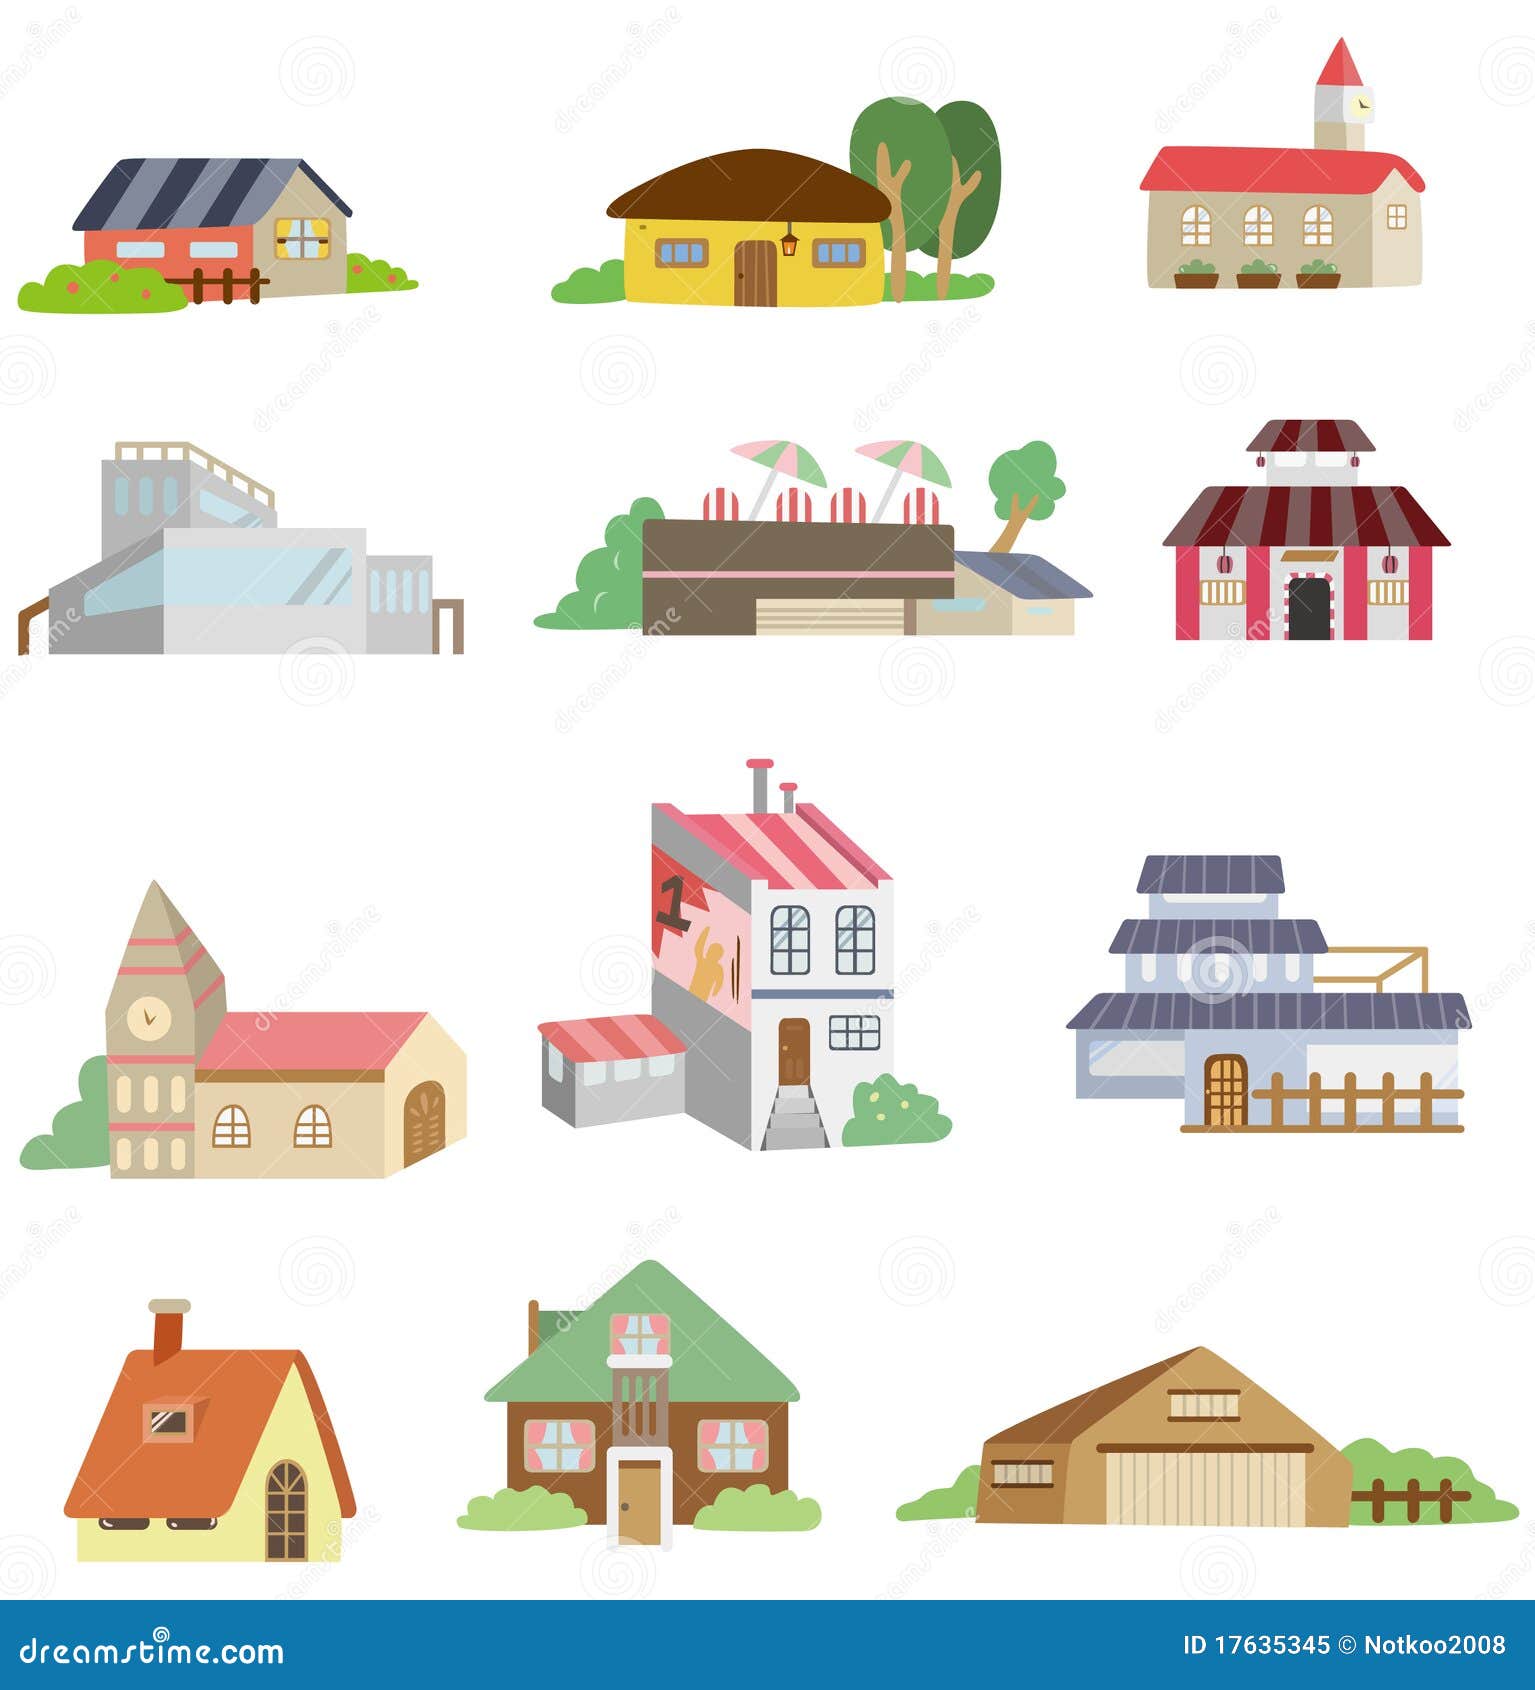 Cartoon house icon stock vector. Illustration of collection - 17635345